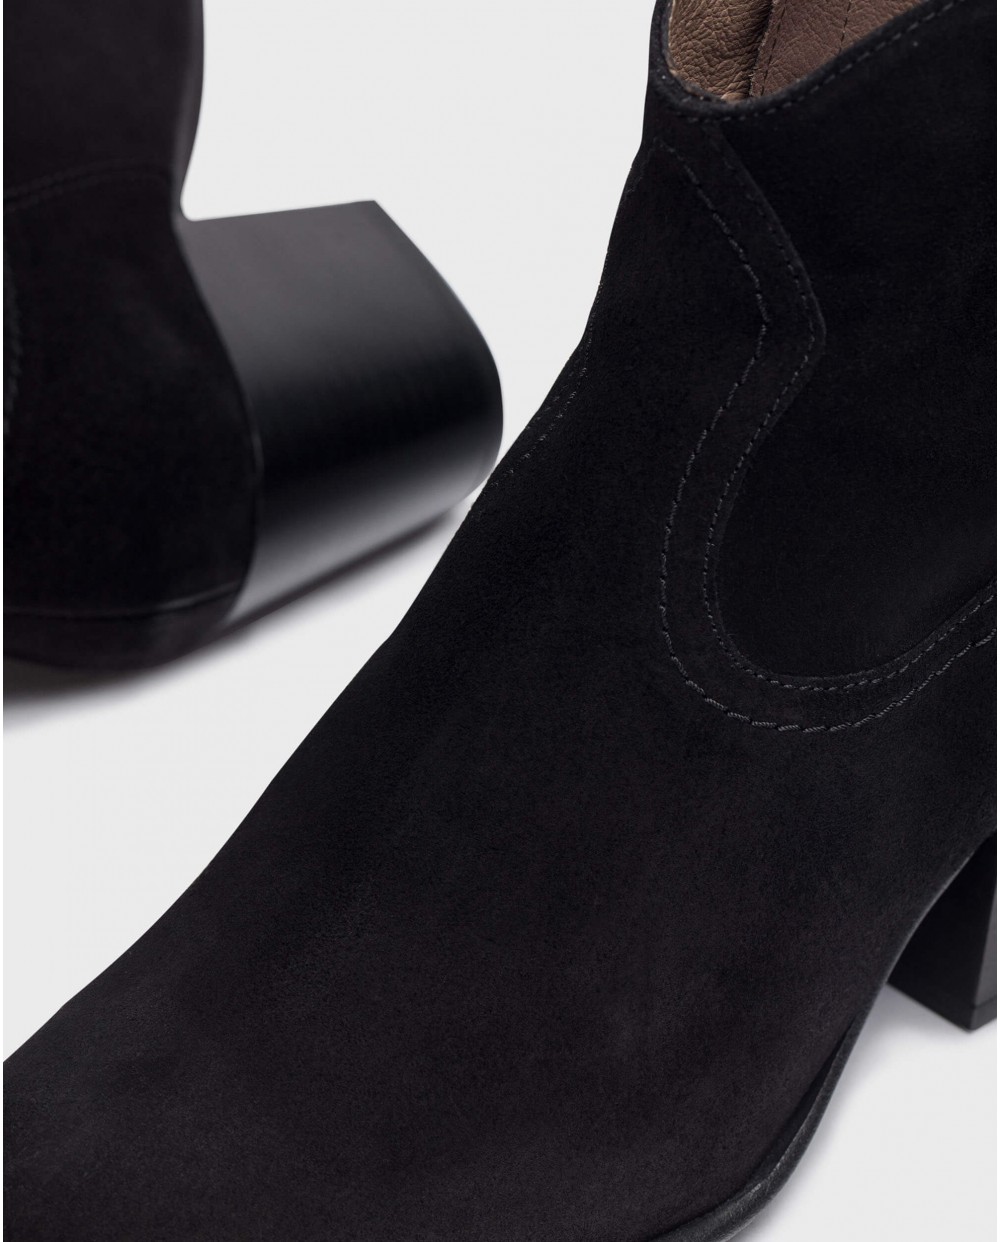 Black CANE ankle boot